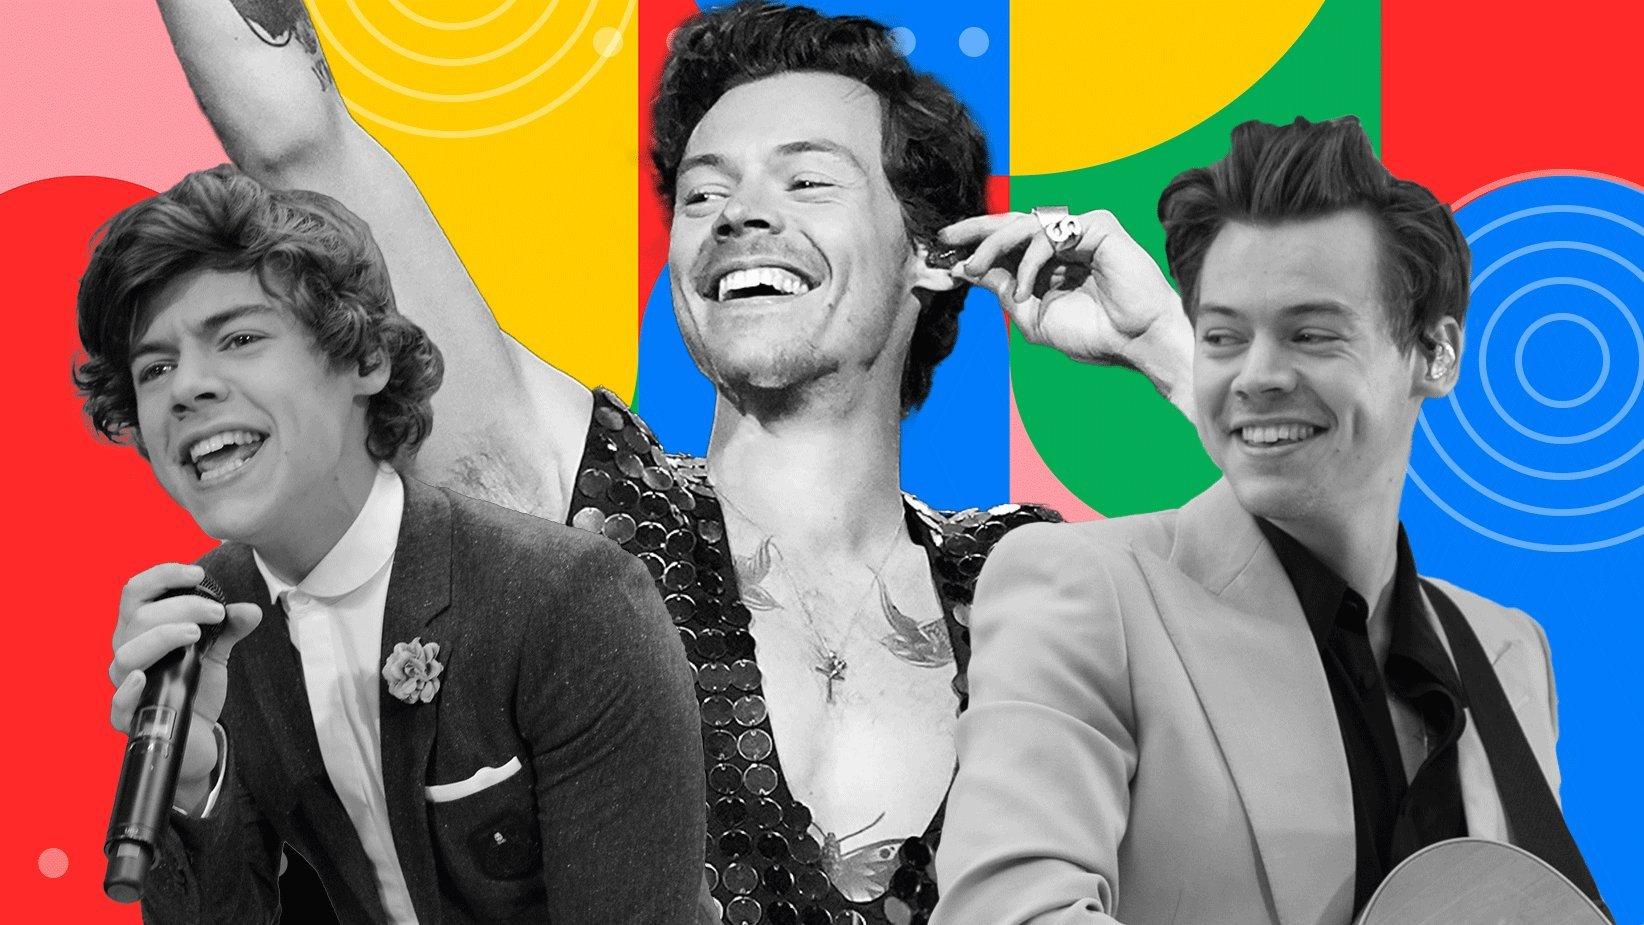 Harry Styles Sonic Evolution How He Grew From Teen Pop Idol To Ever-Evolving Superstar GRAMMY